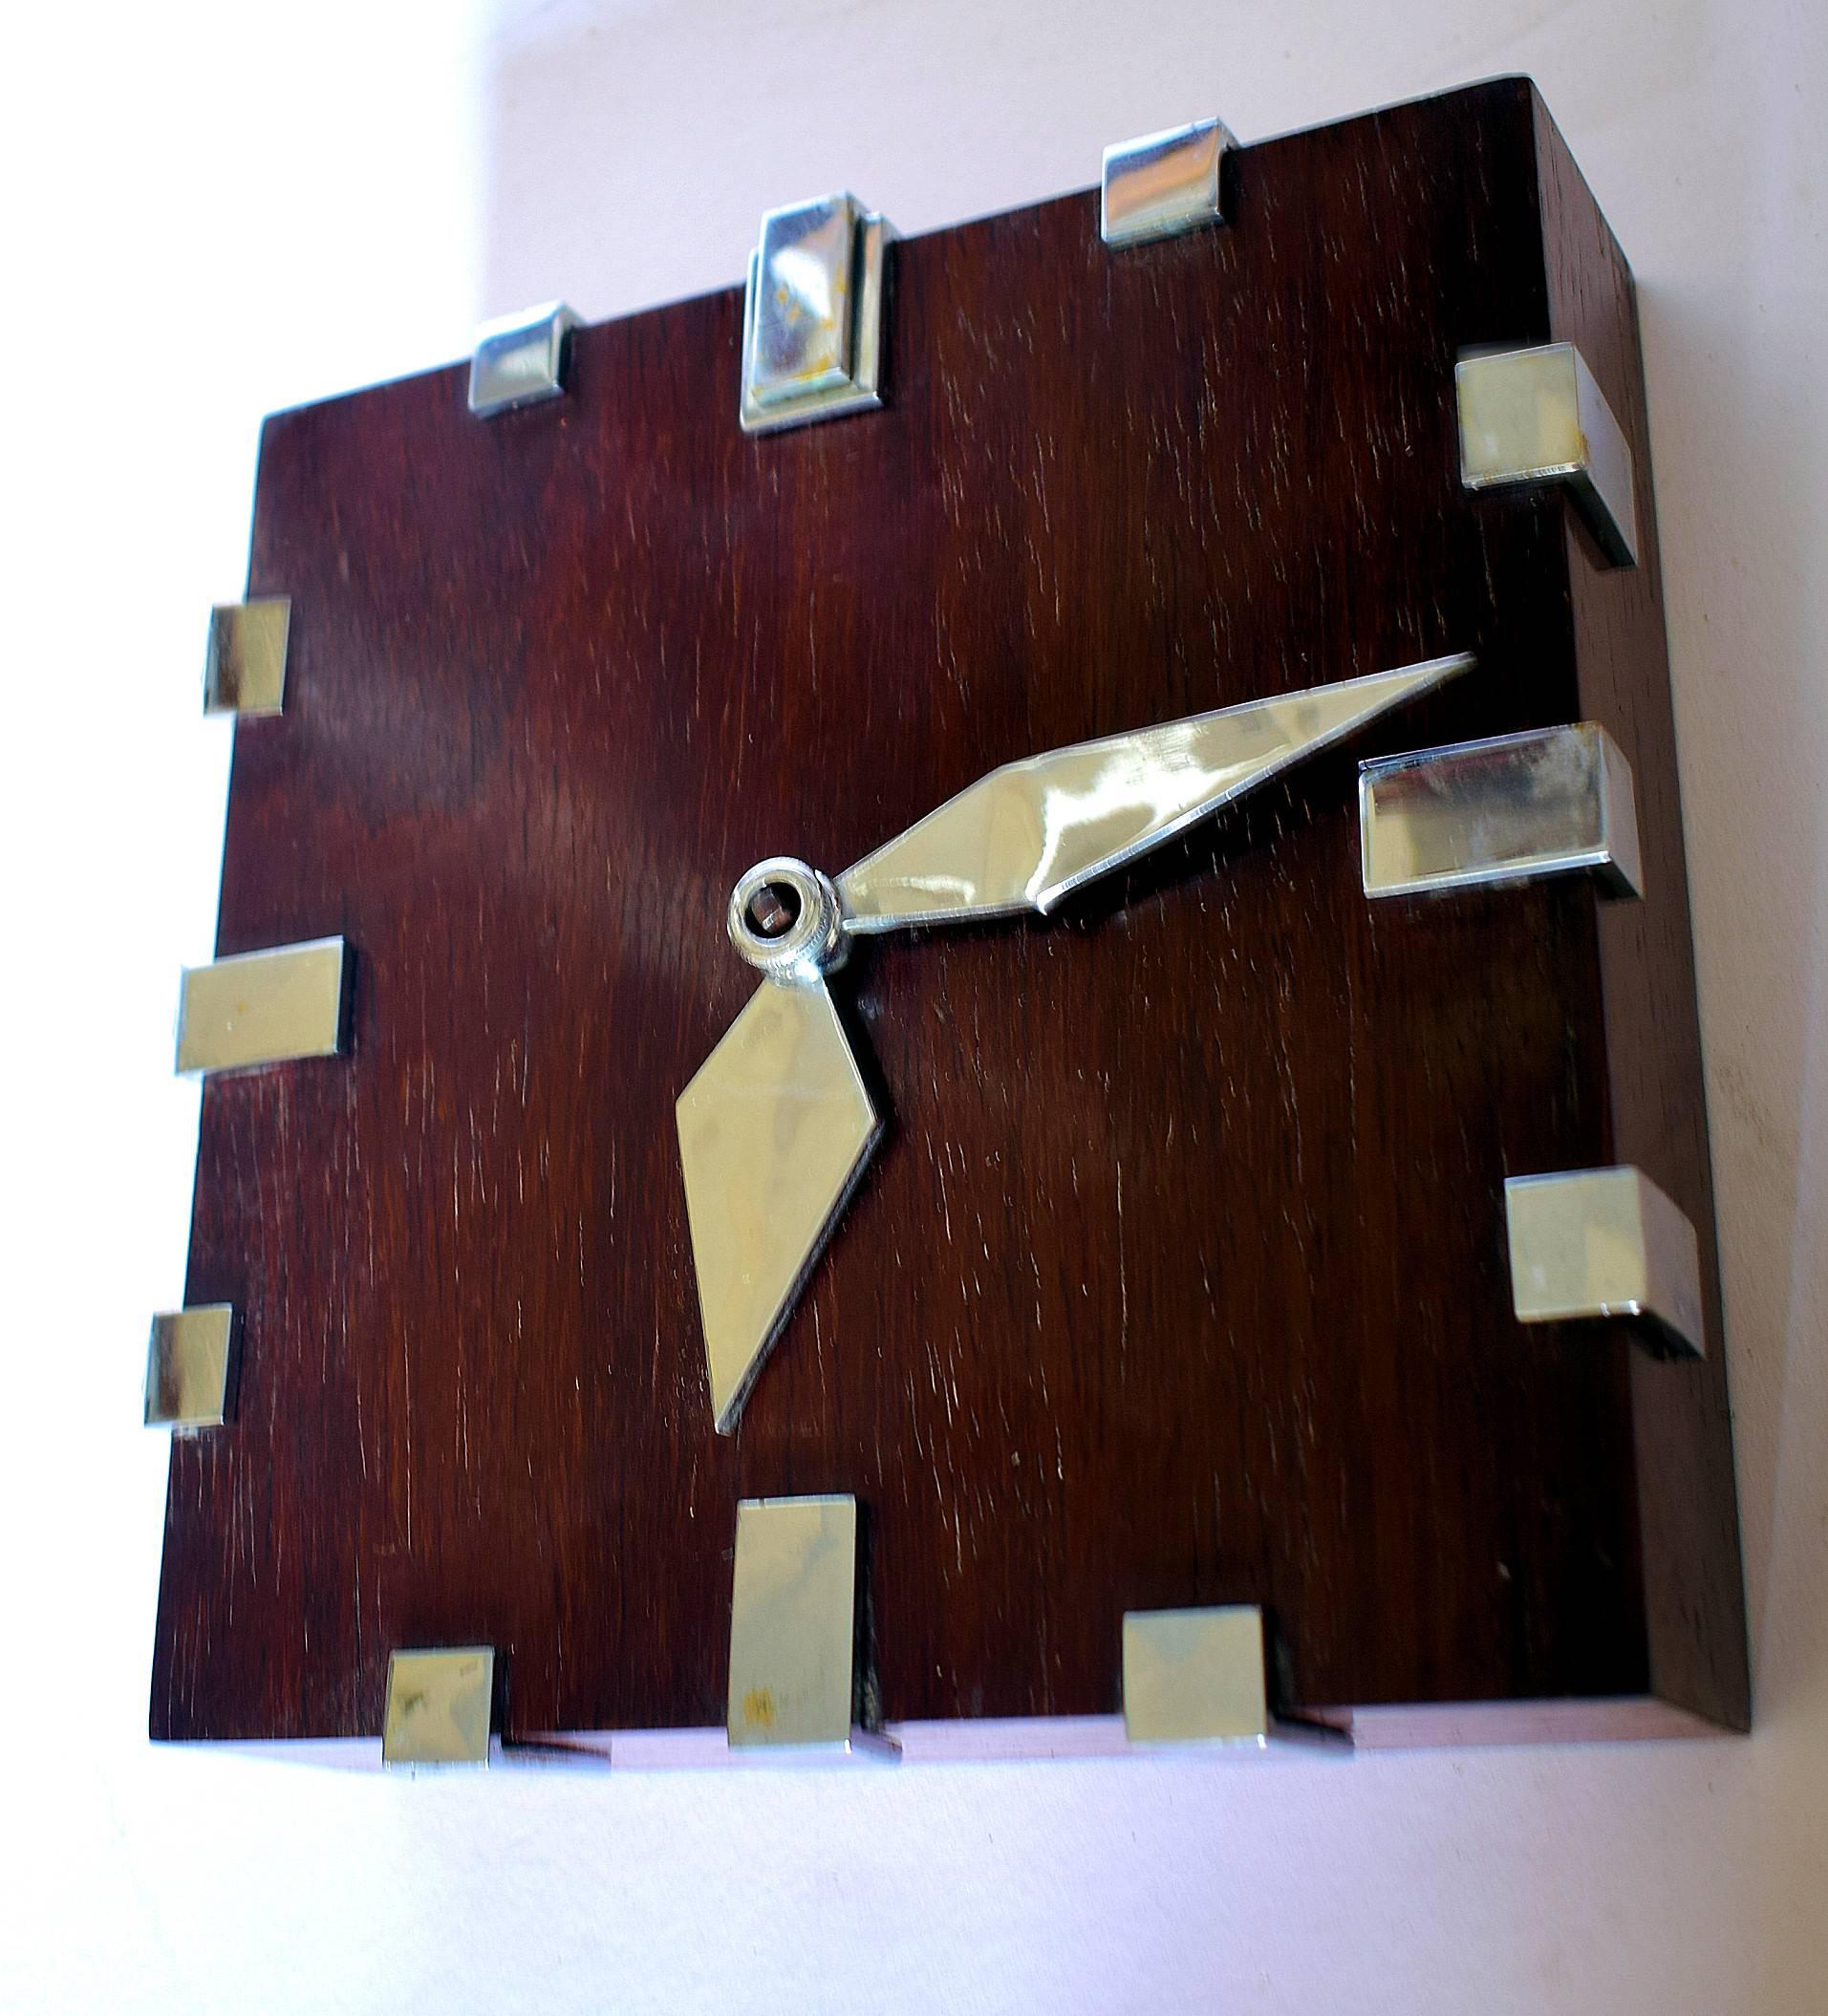 Rare 1930s Art Deco Modernist wall clock by Zenith. The case is in Palissandre wood a beautiful colouring with the stylized numbers and hands in silver on solid brass in high relief. Marked to the back SWISS MADE 18 DAYS / 18 DAYS. Fully serviced